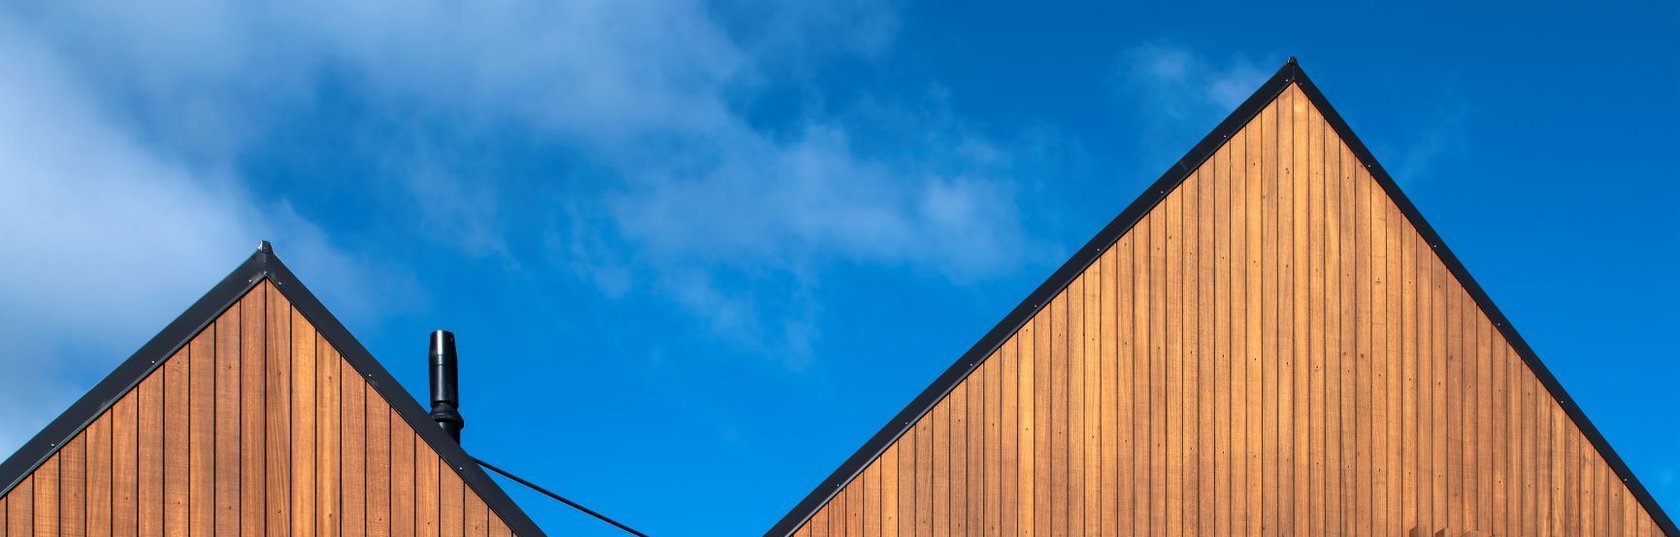 The thermally modified wood revolutionising timber cladding